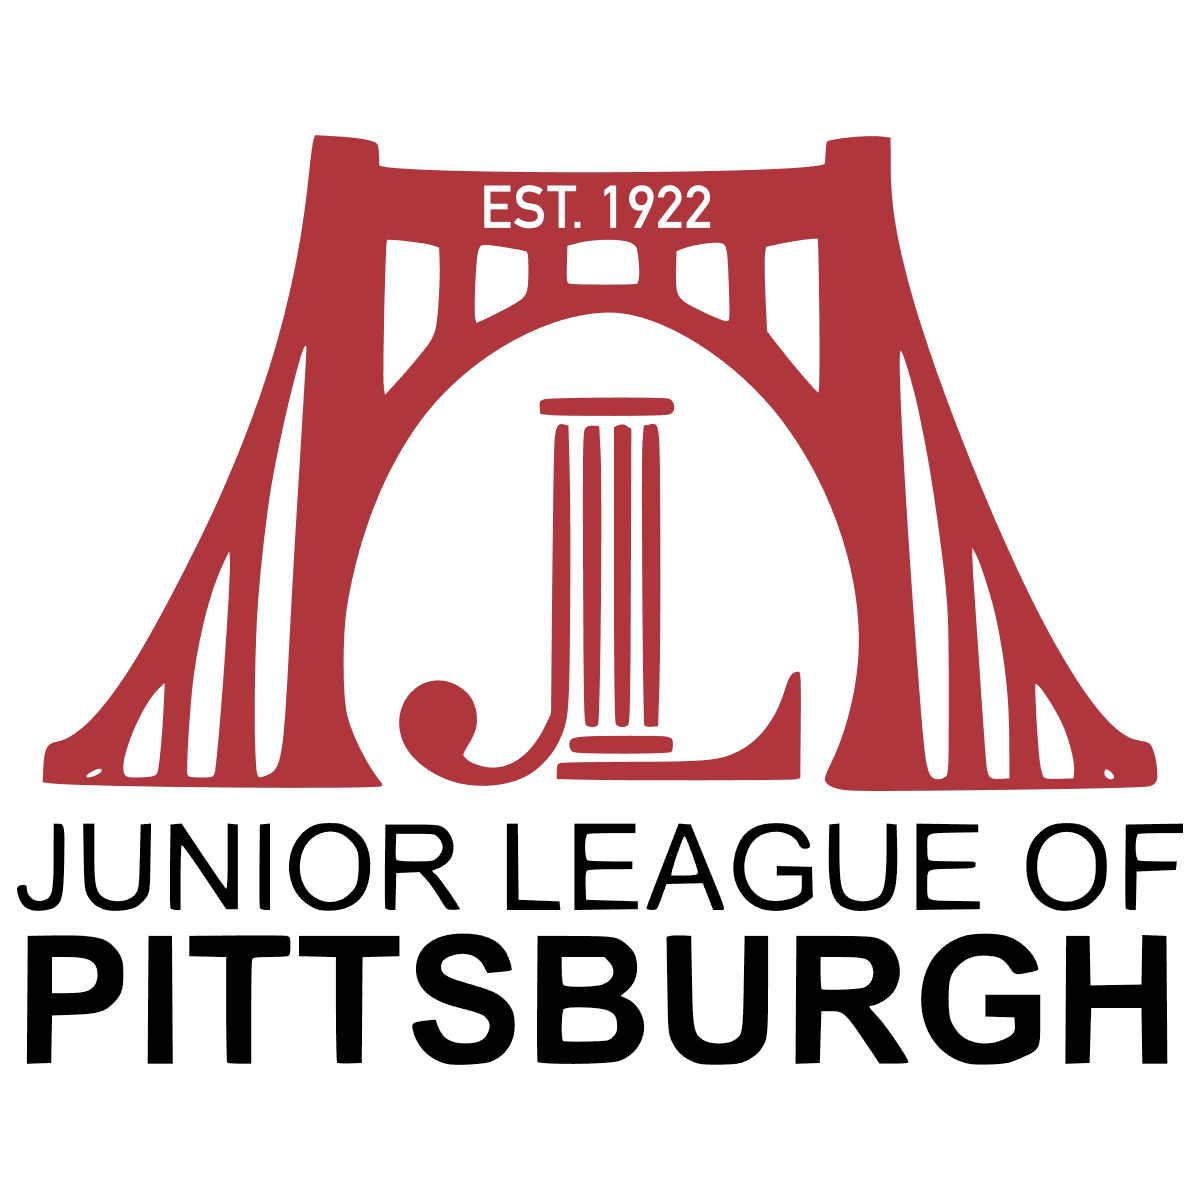 The Junior League of Pittsburgh, Inc.